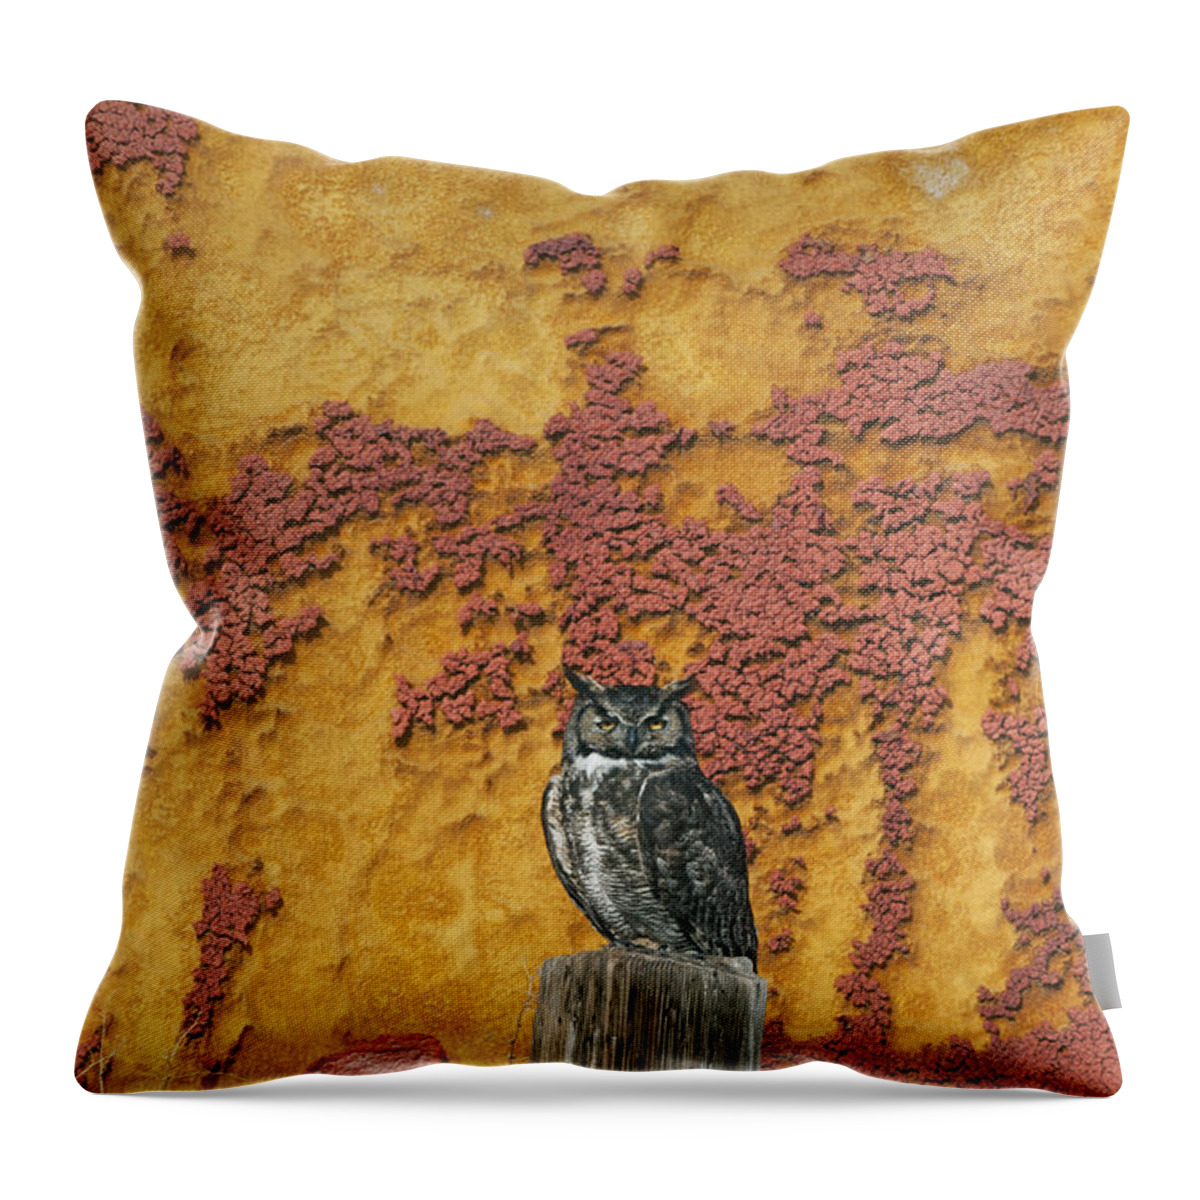 Feb0514 Throw Pillow featuring the photograph Great Horned Owl Tule Lake Nwr by Kevin Schafer